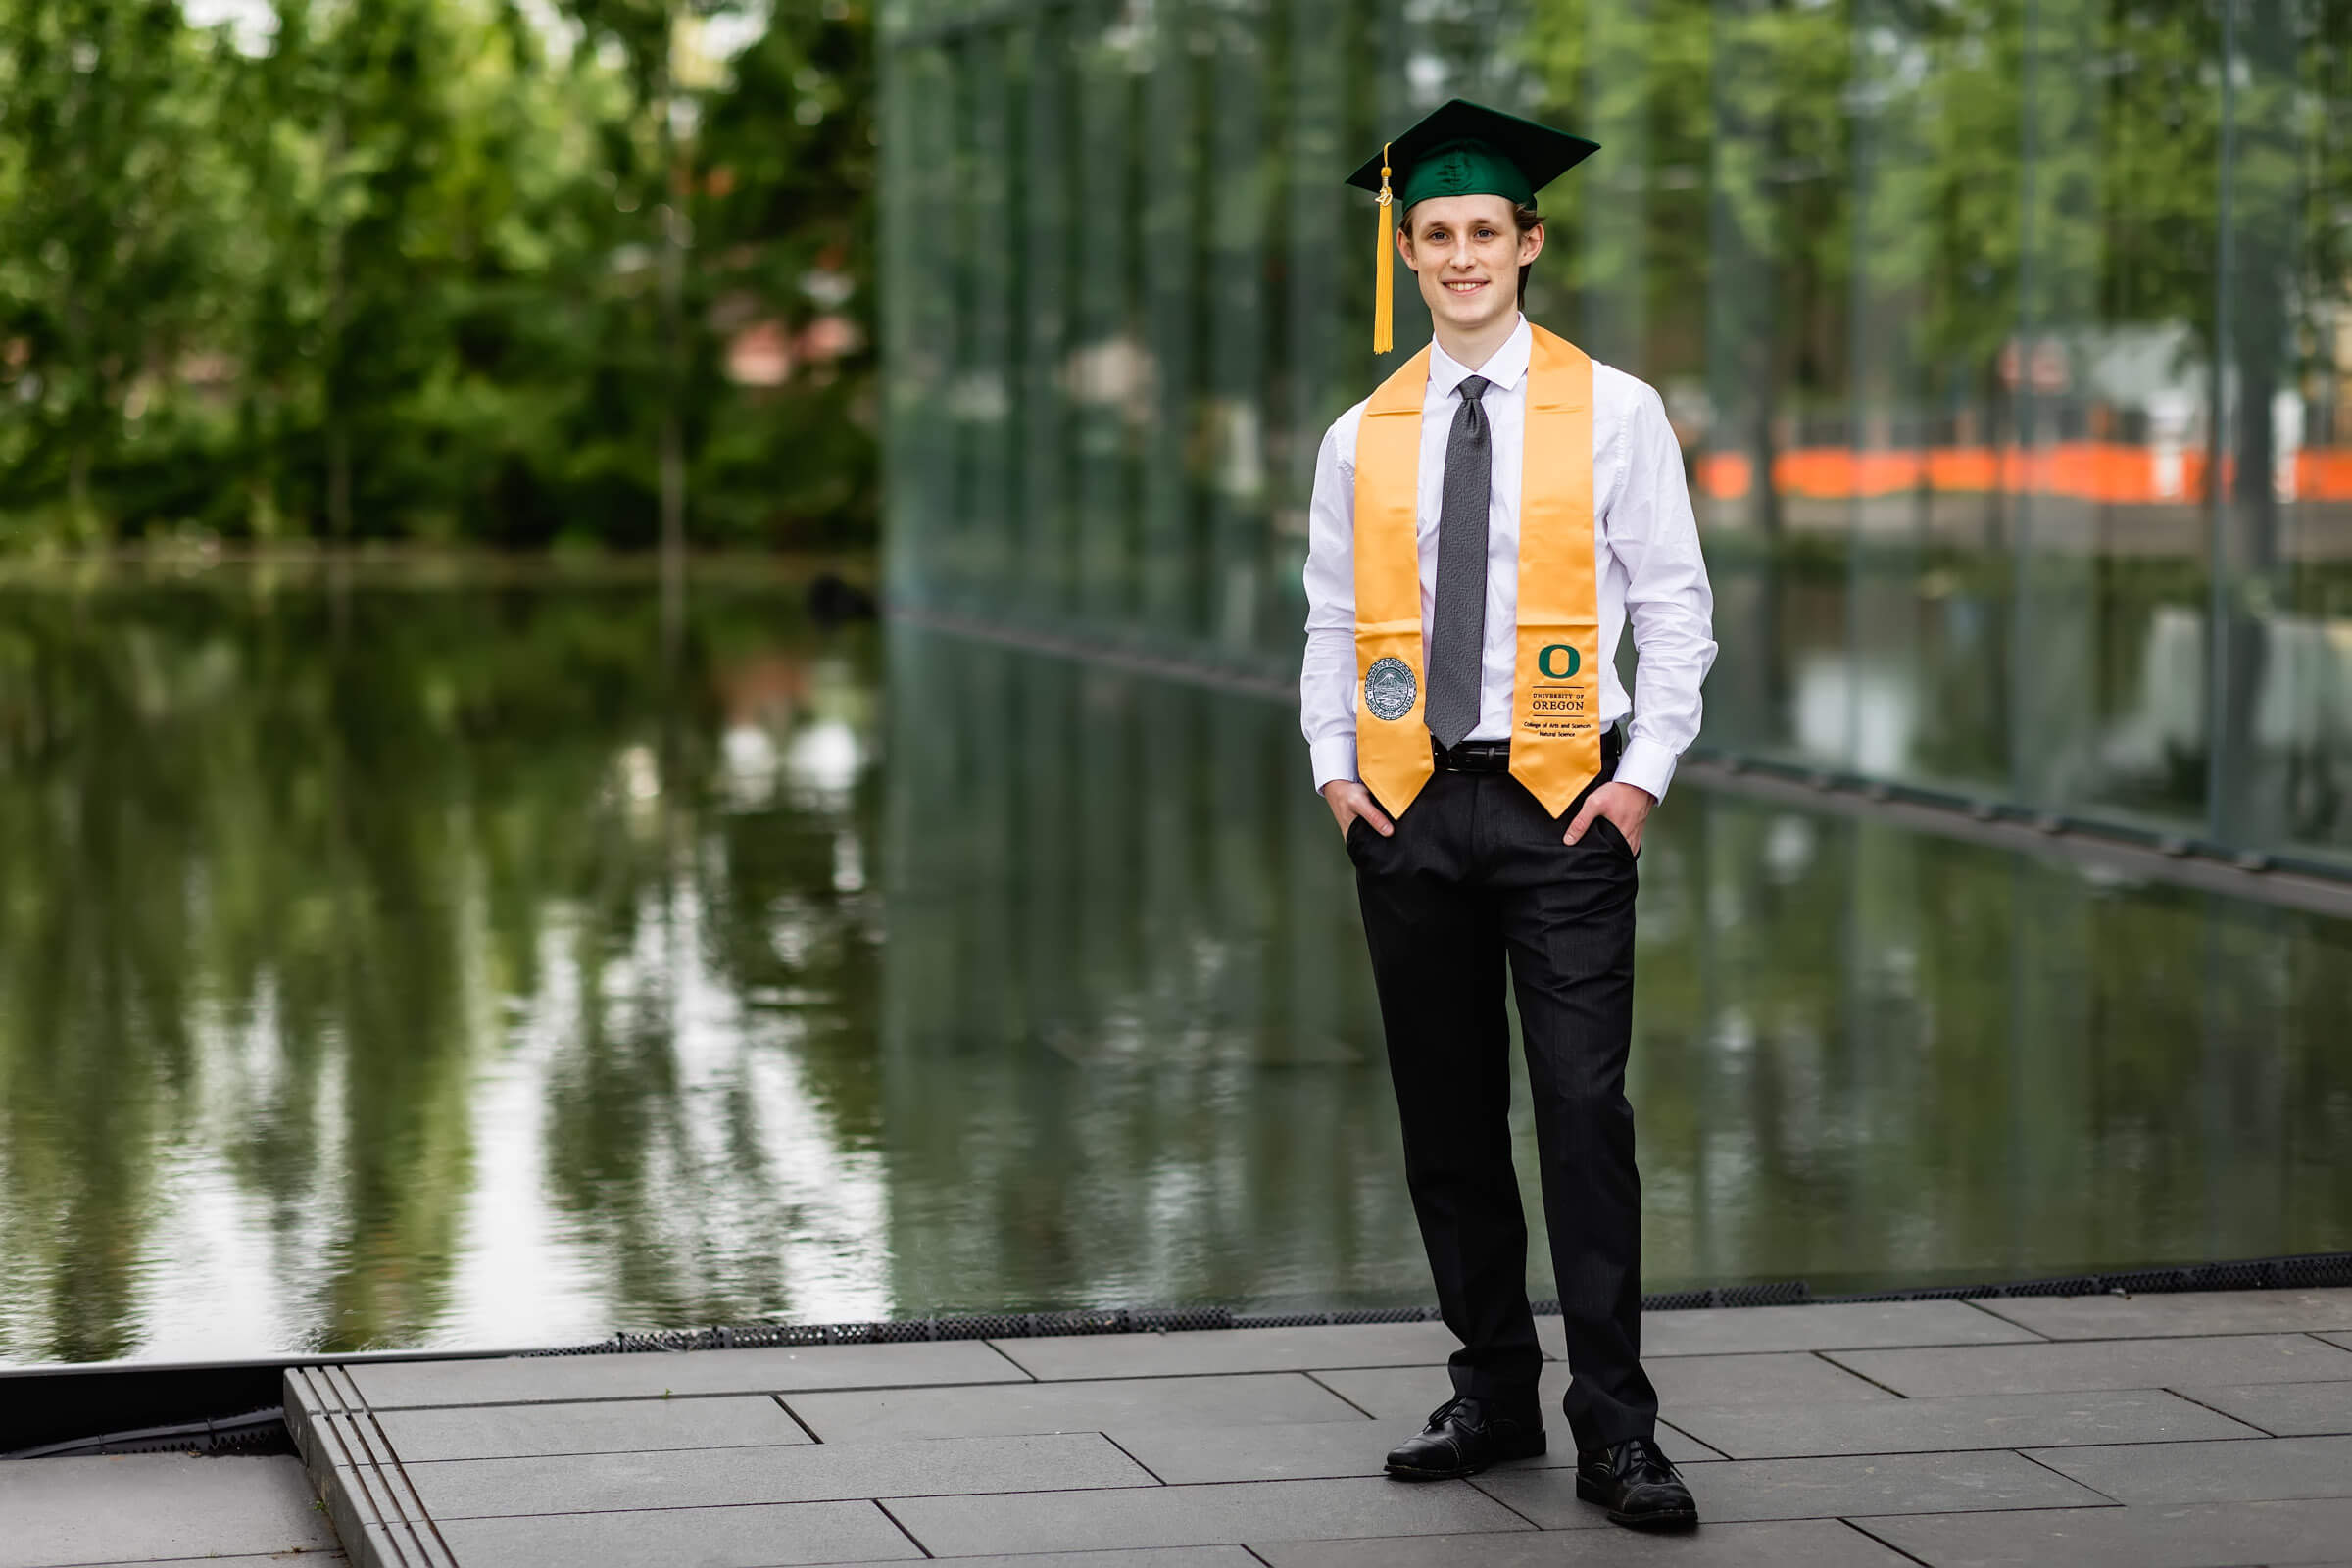 Male wearing university of Oregon graduation cap in front of John E. Jaqua Center for Student Athletes